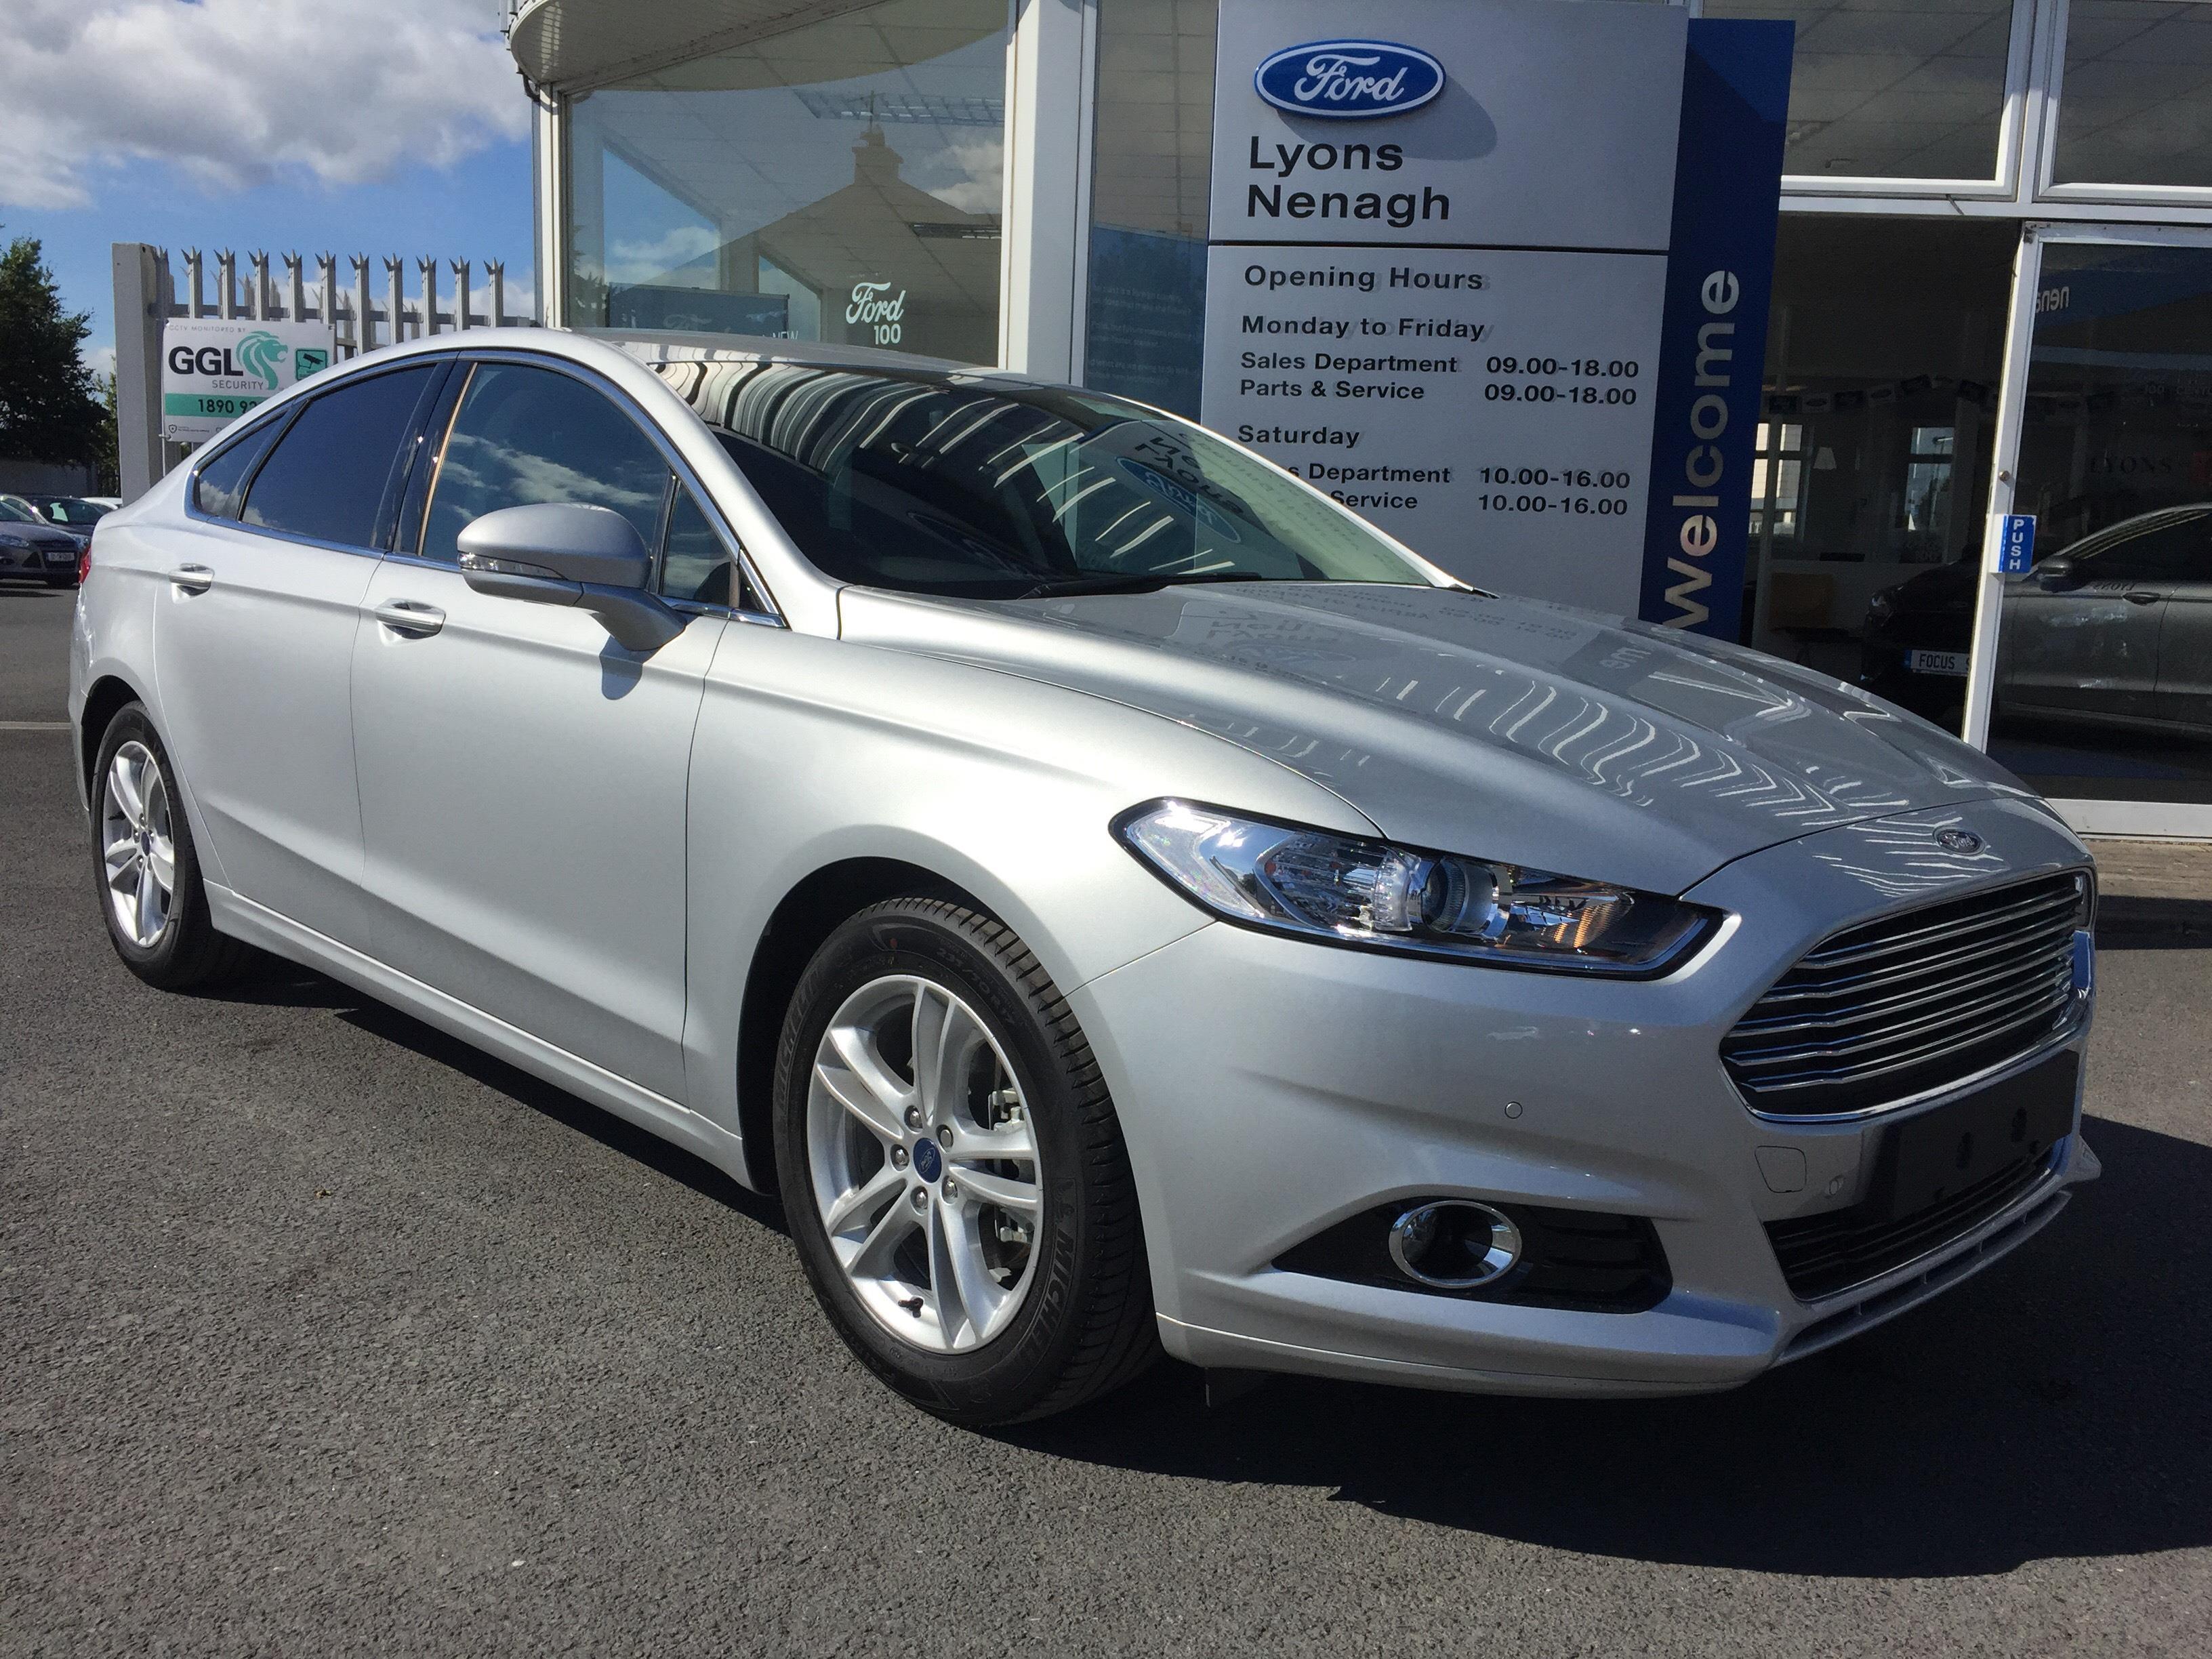 Ford Mondeo Hybrid accessories model